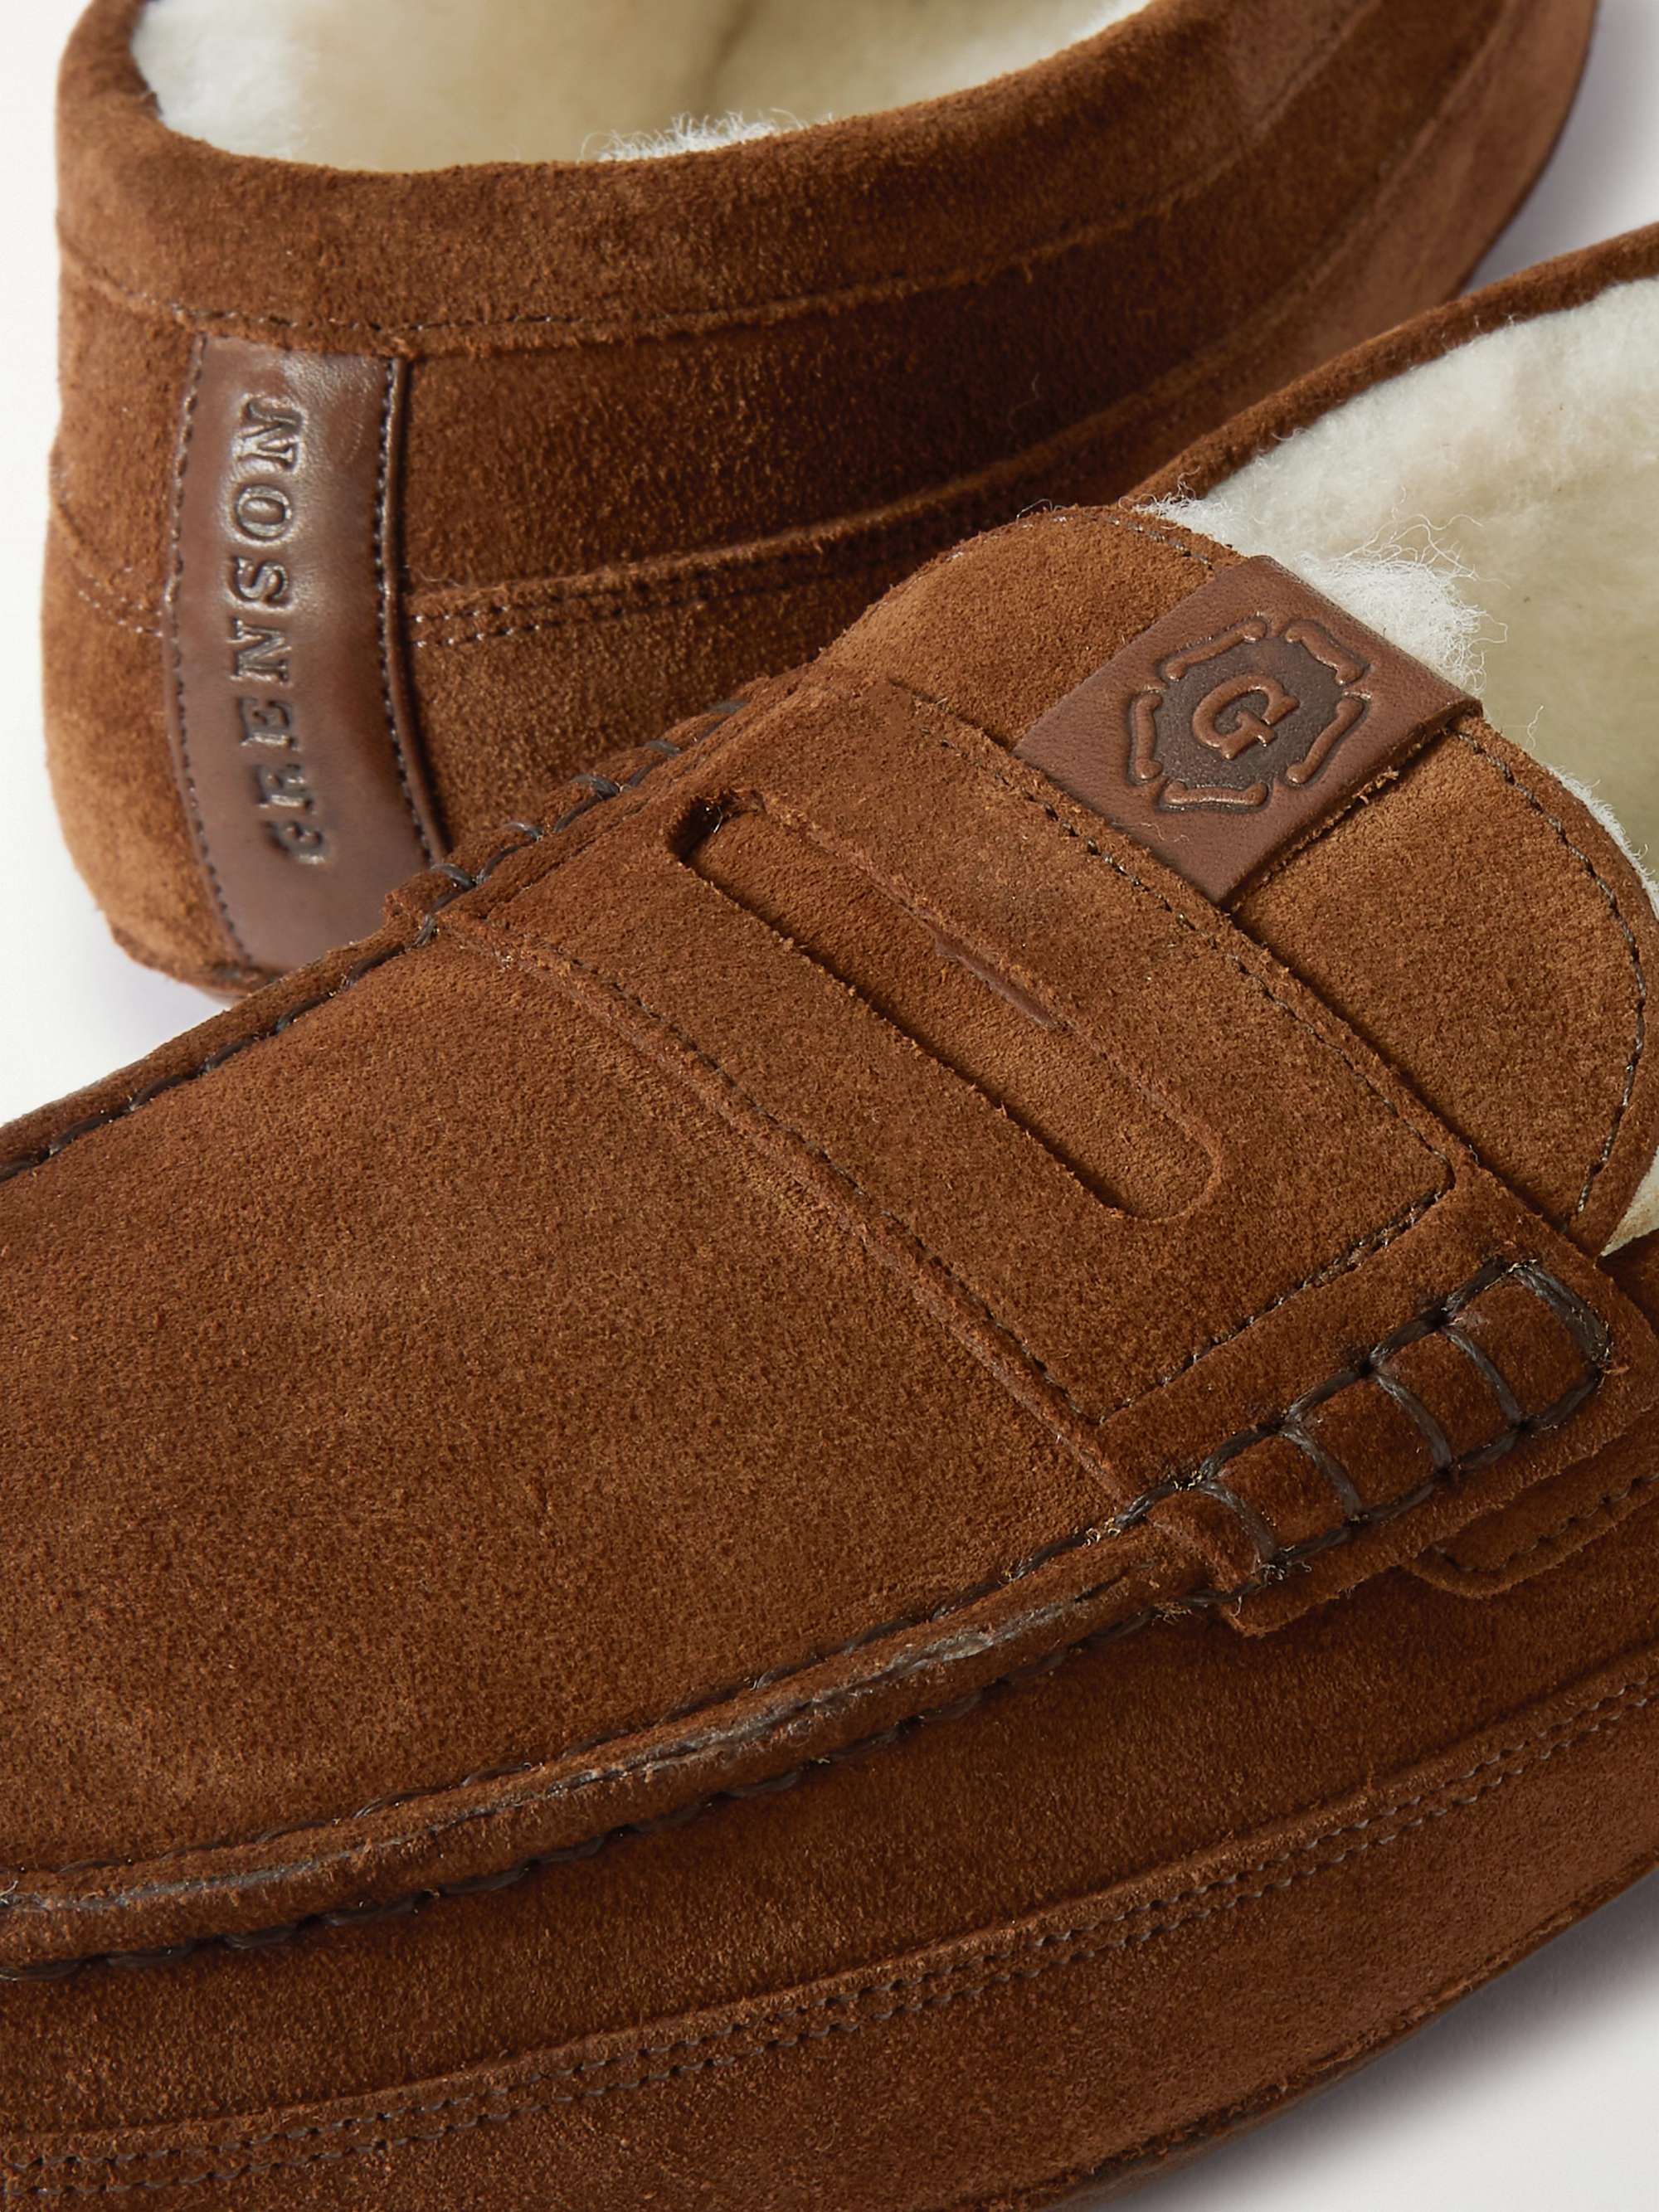 GRENSON Sly Shearling-Lined Suede Slippers